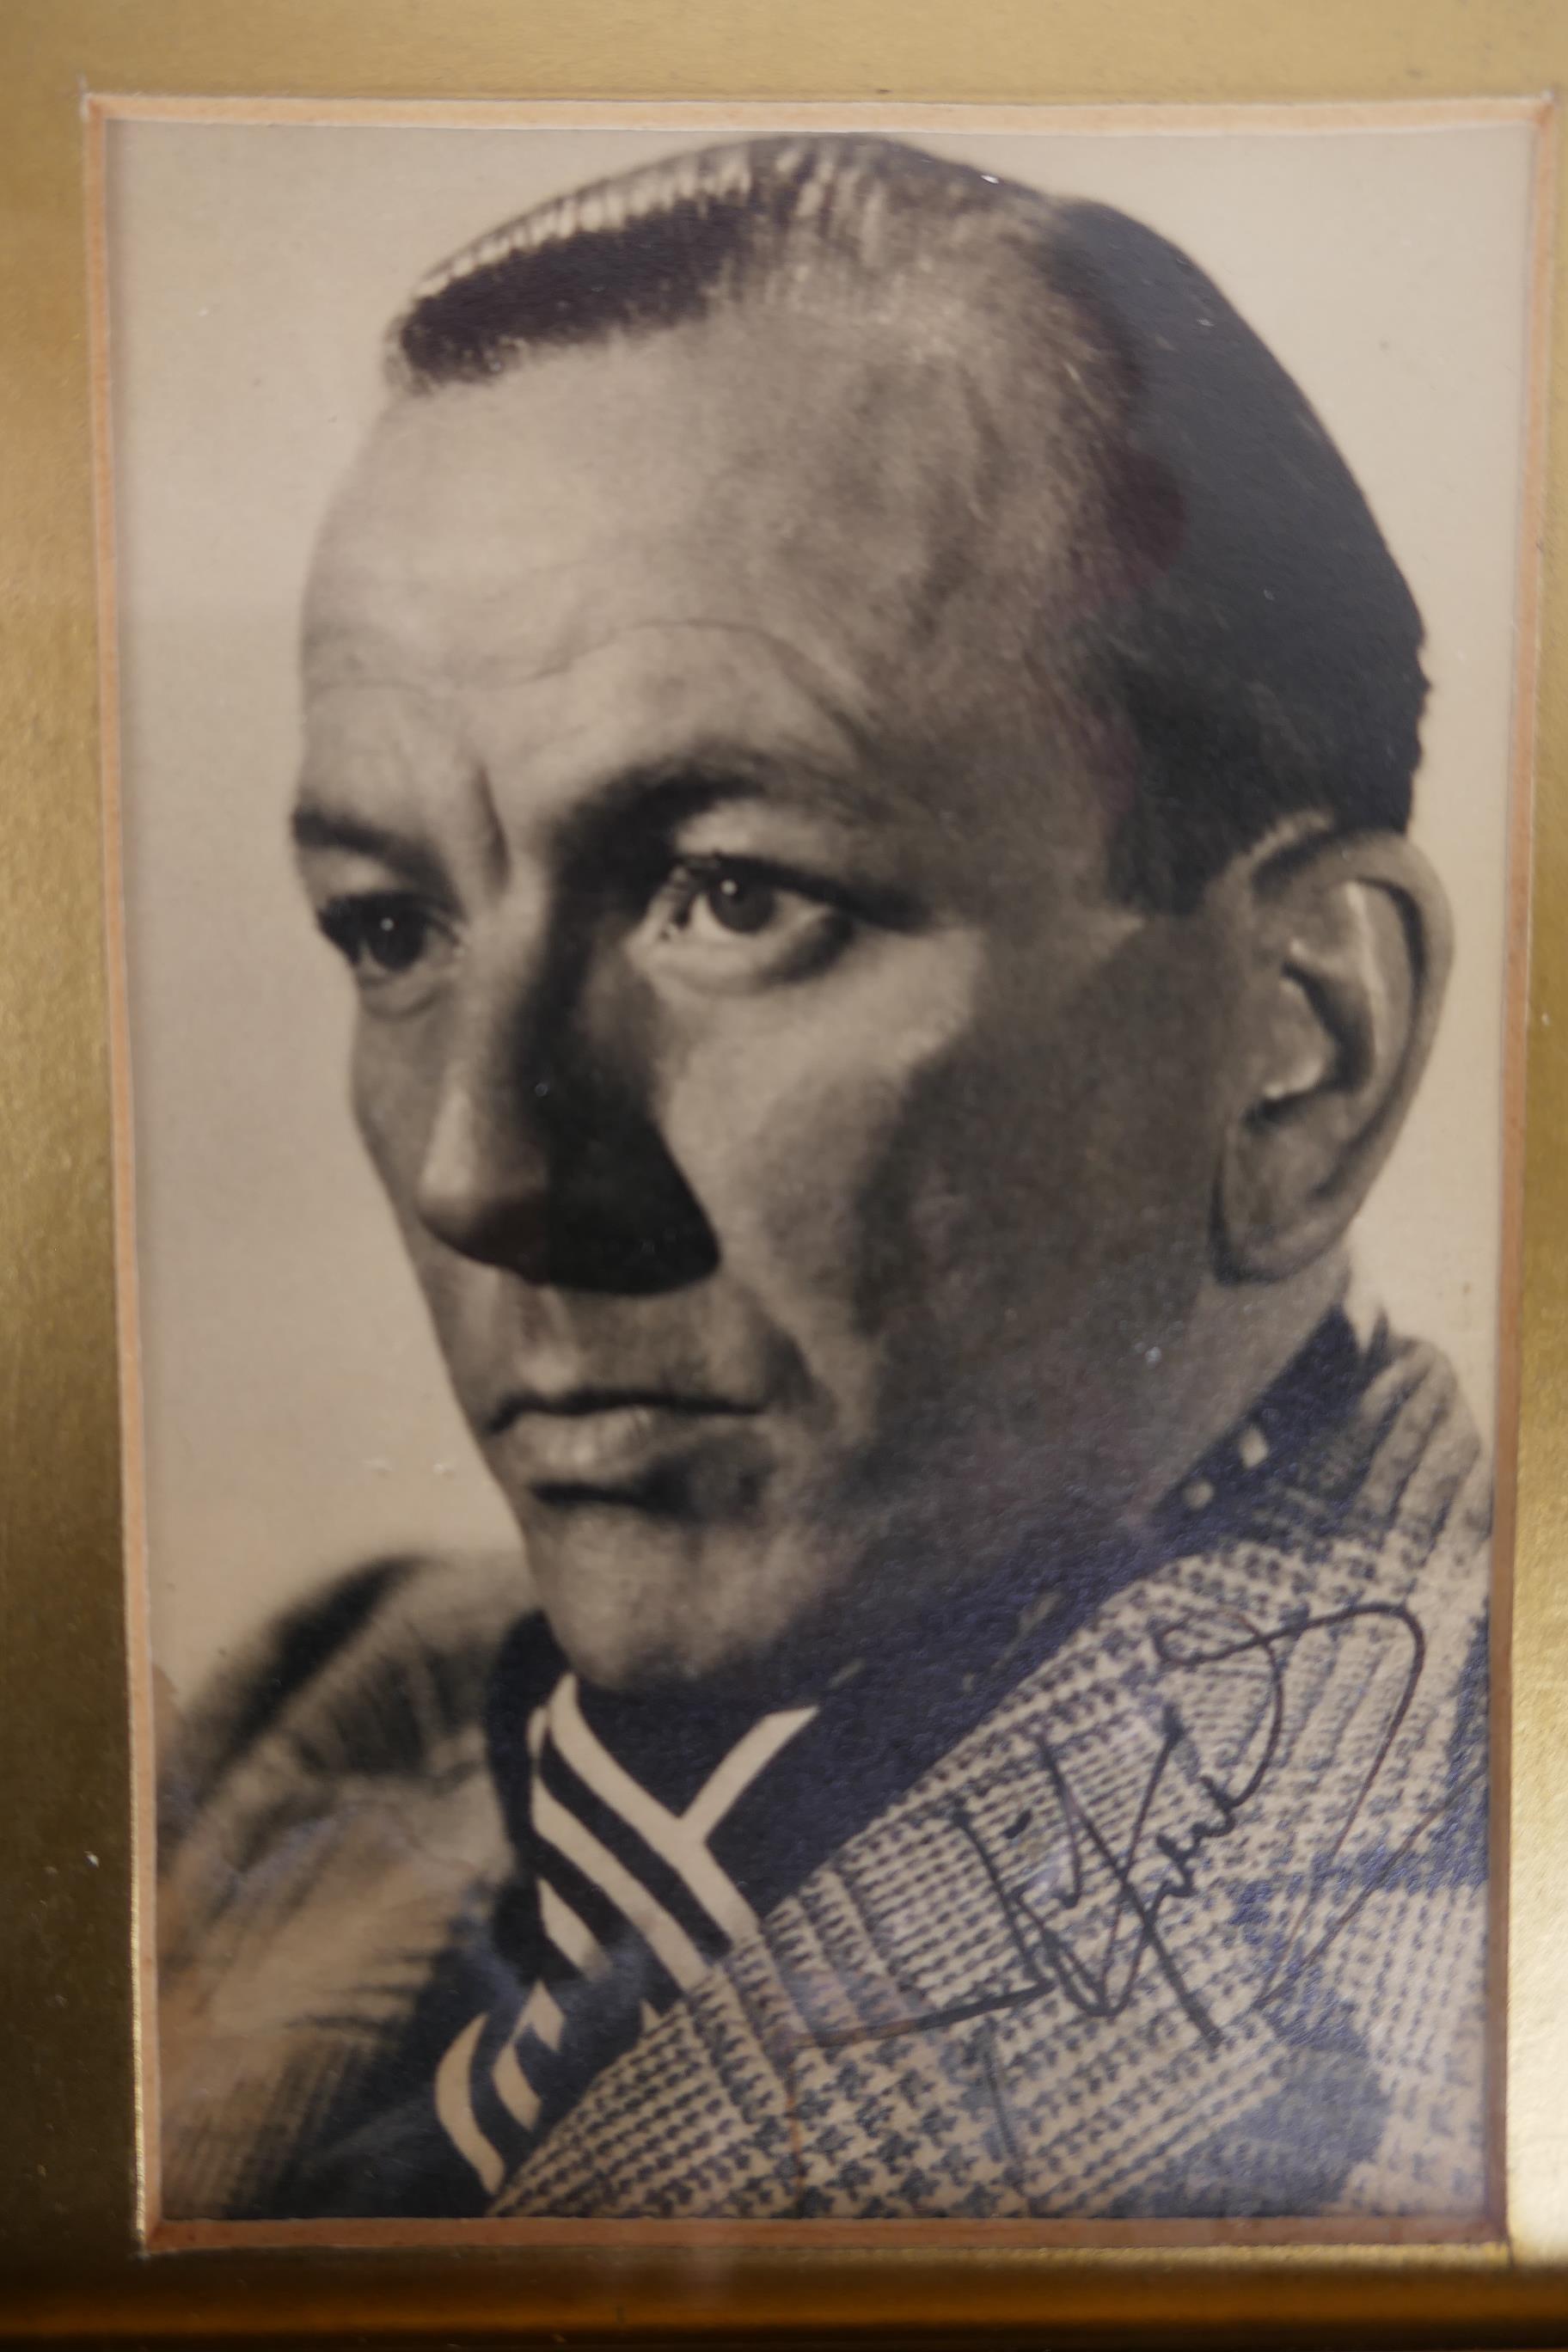 Noel Coward (British, 1899-1973) – British playwright, actor, composer, director and singer, - Image 6 of 9